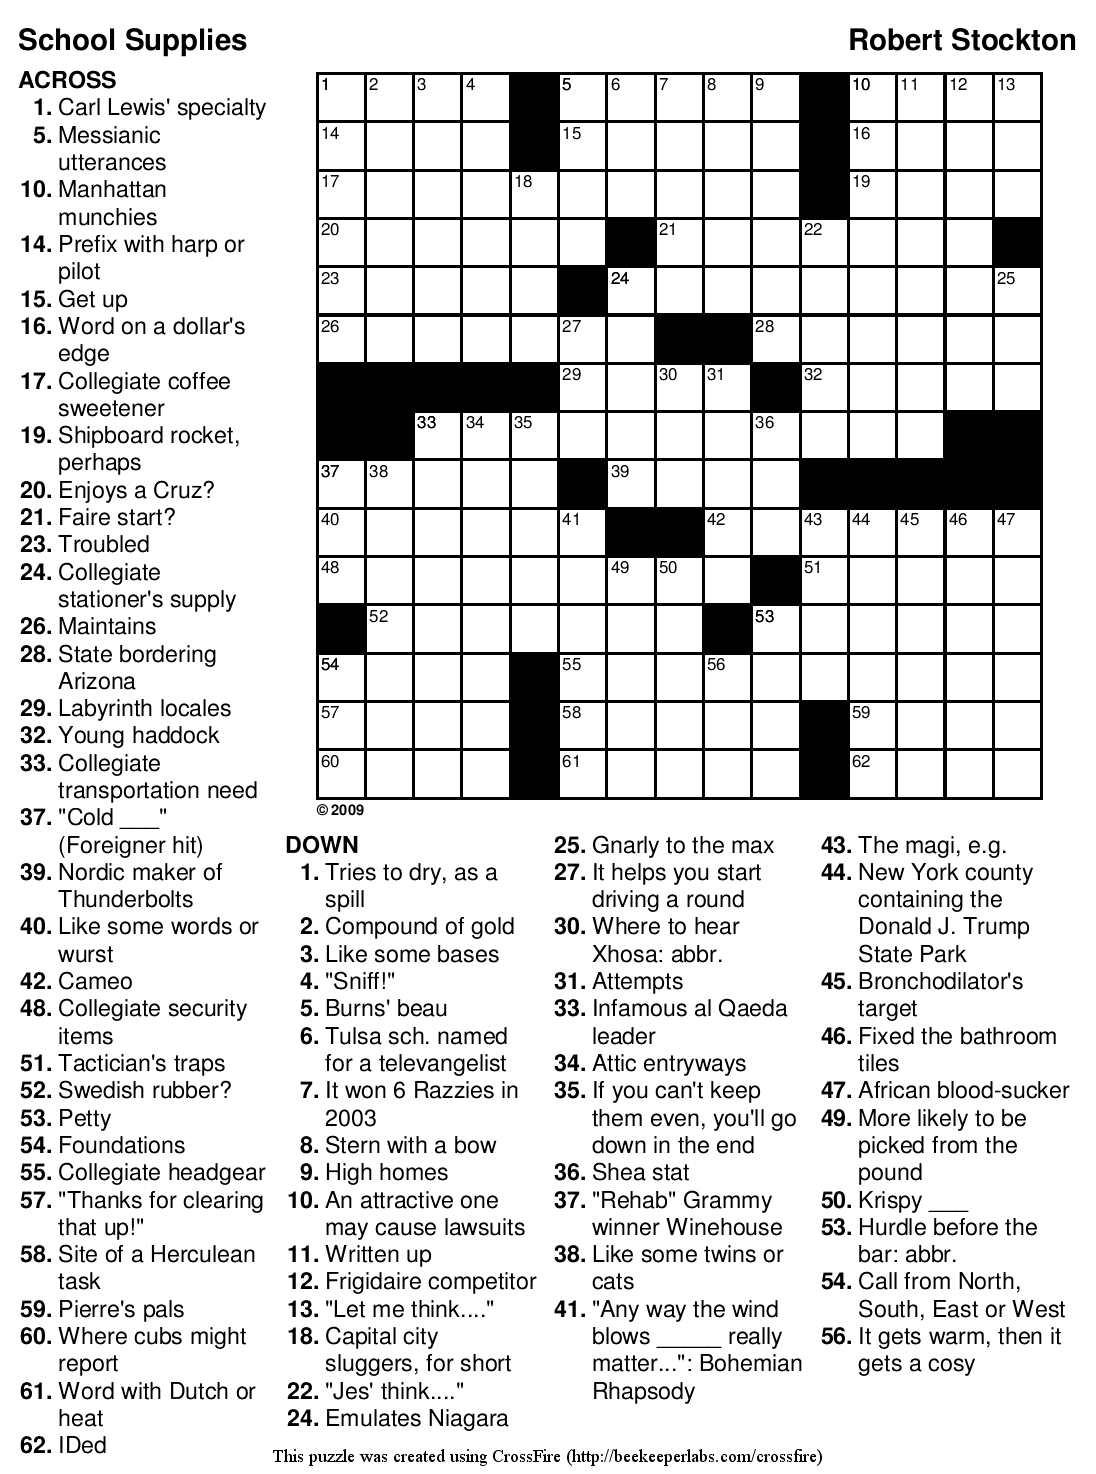 Easy Printable Crossword Puzzles | Crosswords Puzzles | Printable - Free Easy Printable Crossword Puzzles For Adults